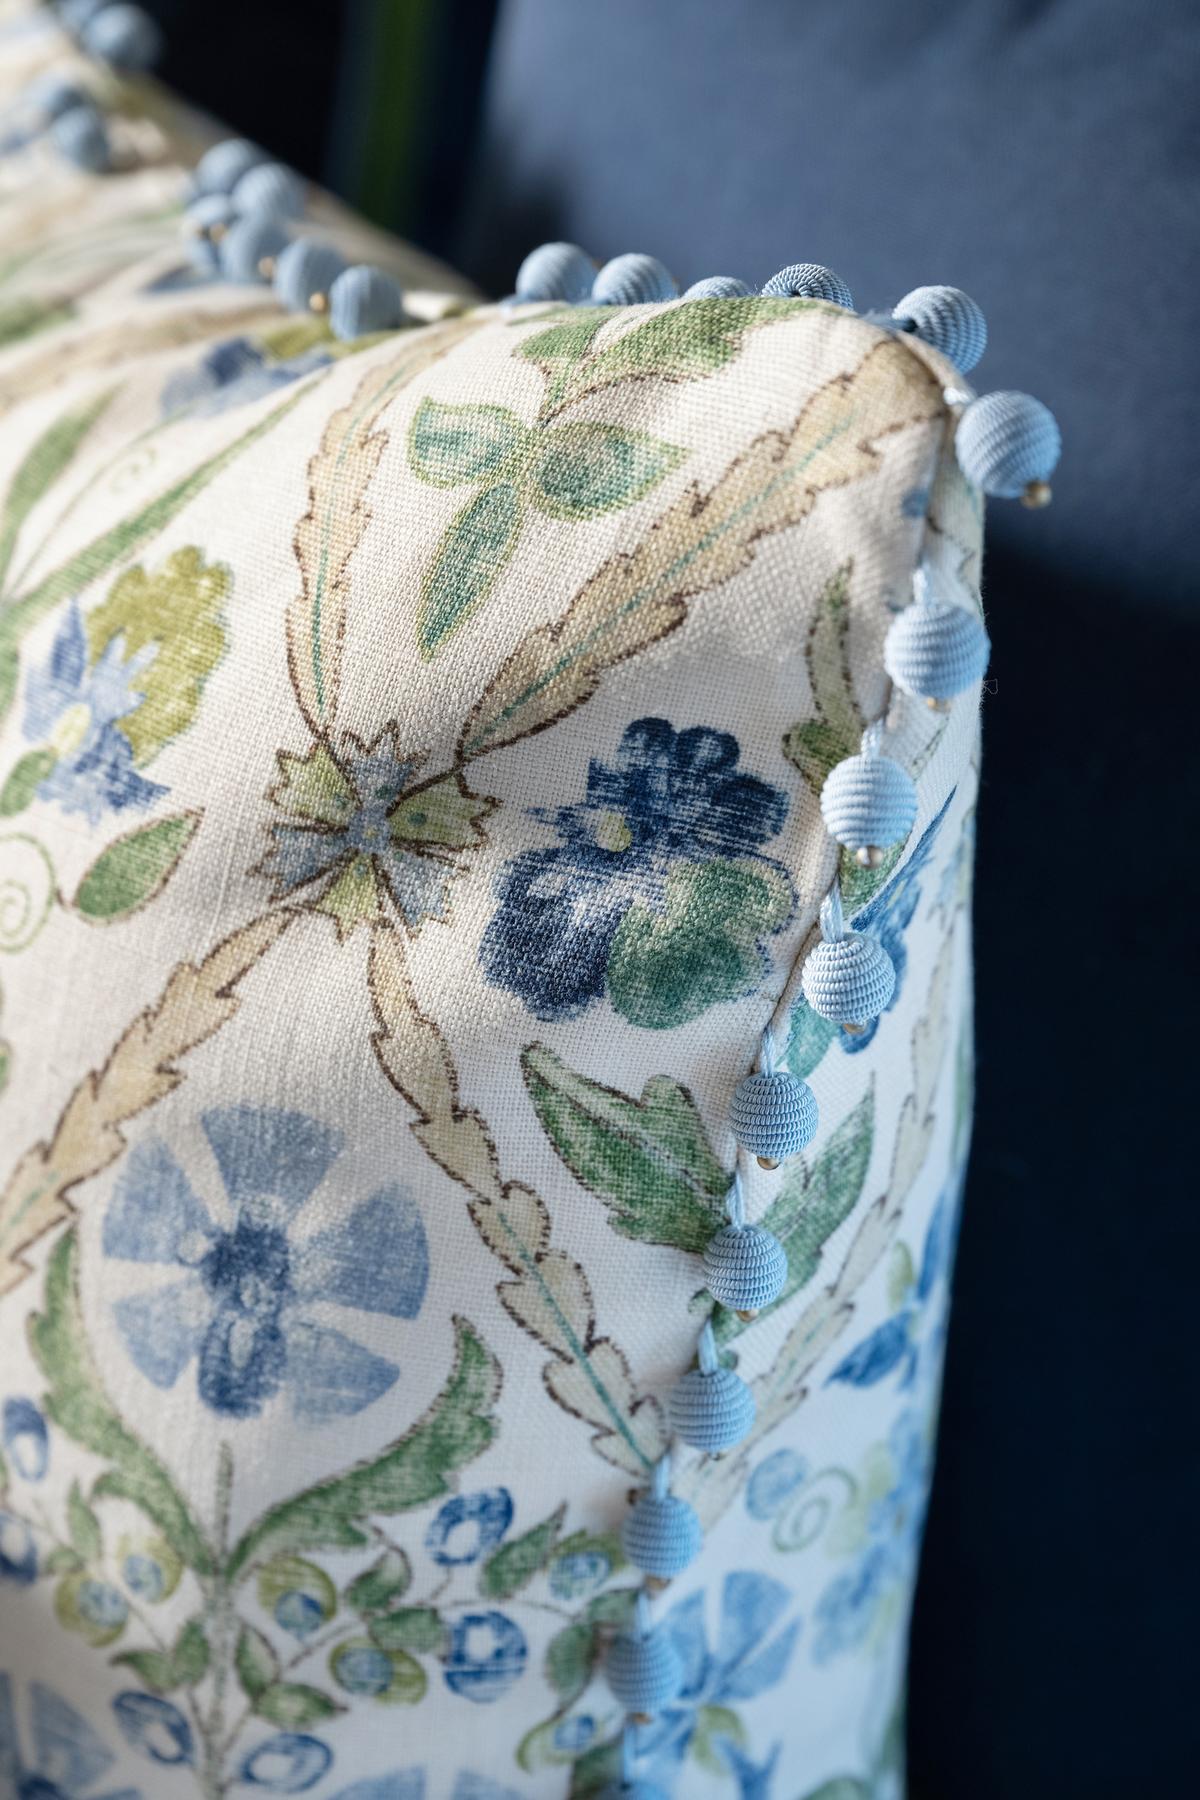 Bauble trim dazzles in this blue and green new traditional bed pillow. (Provided photo/TNS)